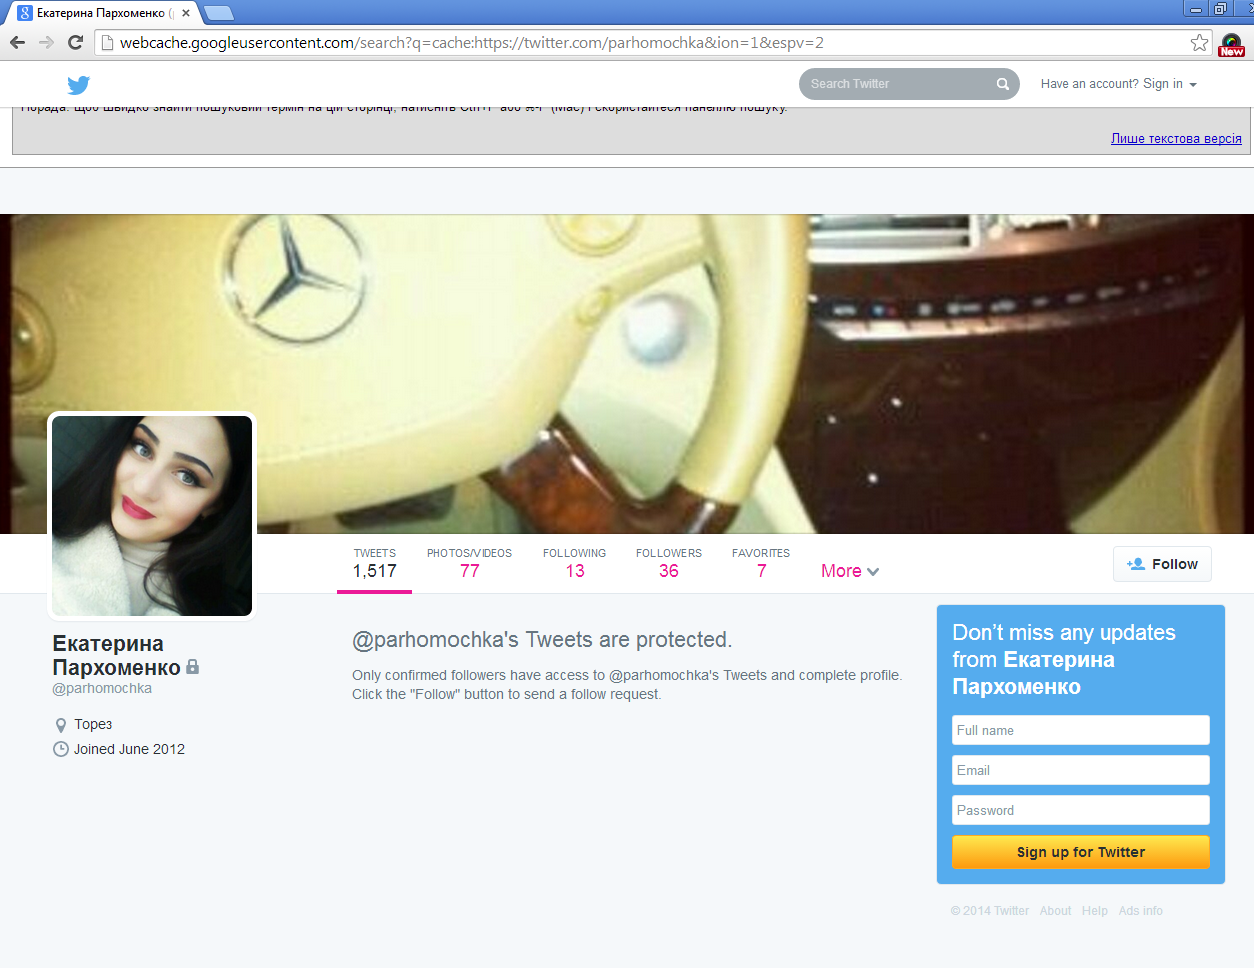 Screenshot of the webpage of the user @parhomochka in Twitter from the Google cashe